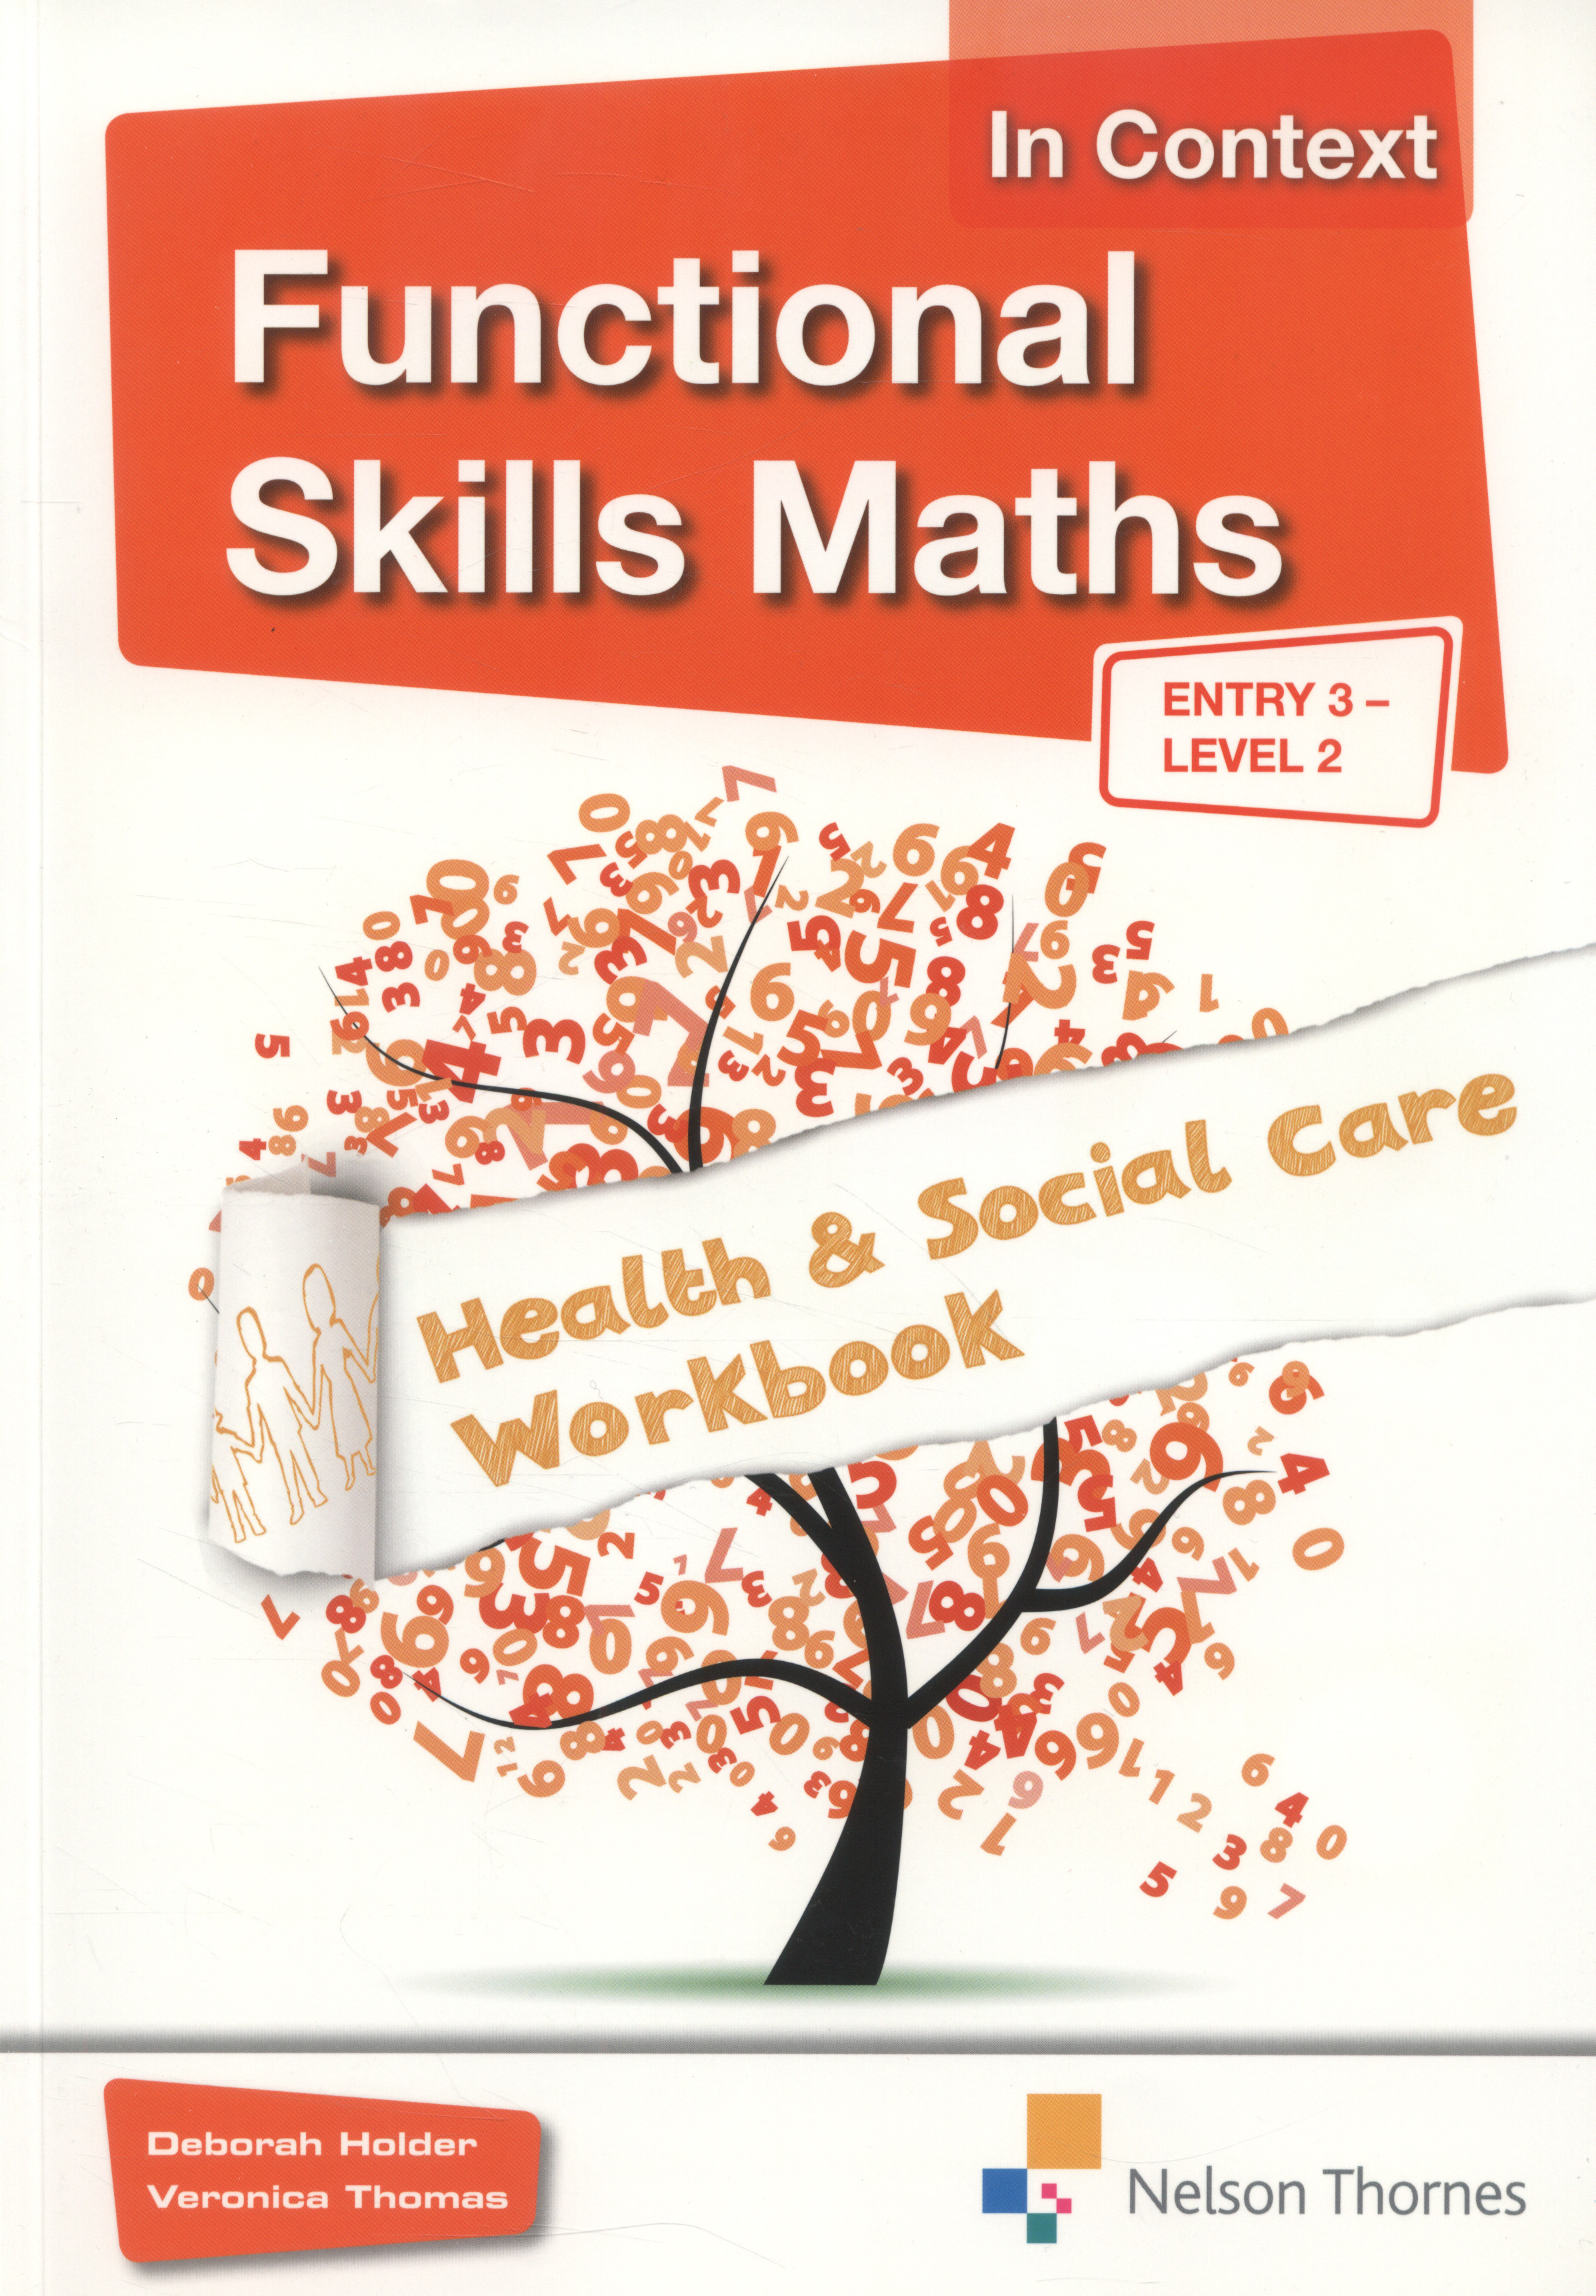 functional-skills-maths-entry-3-level-2-health-and-social-care-workbook